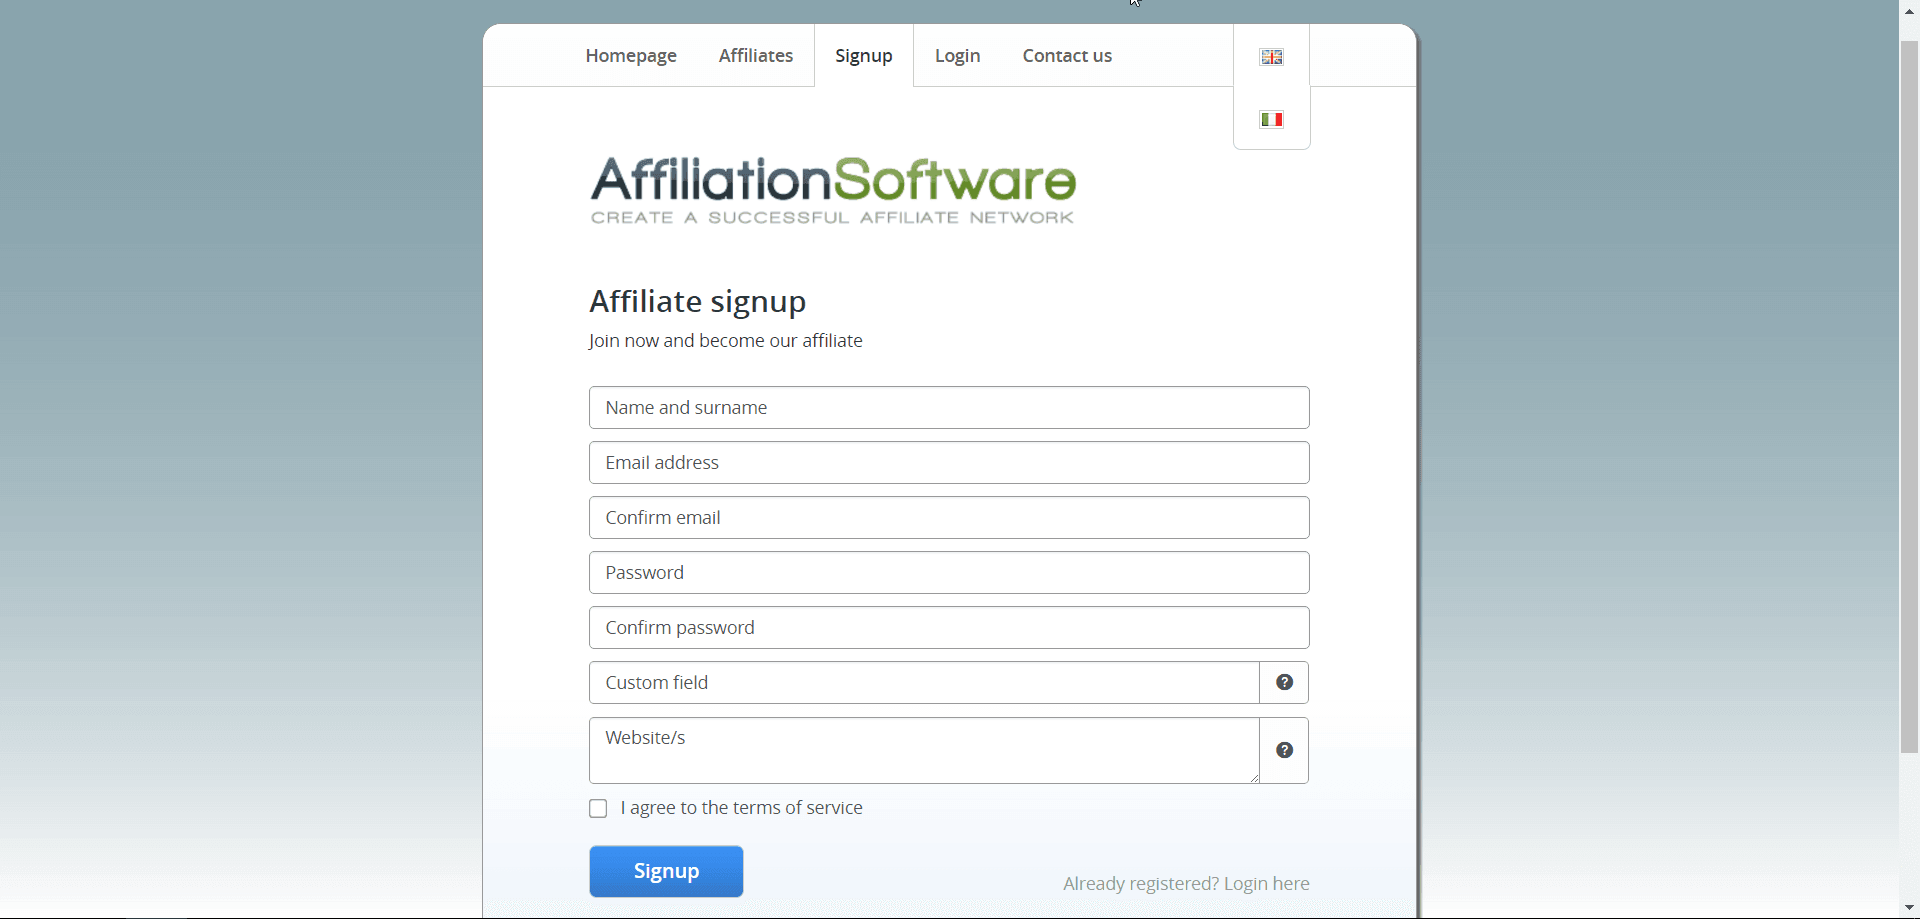 Signup page of AffiliationSoftware